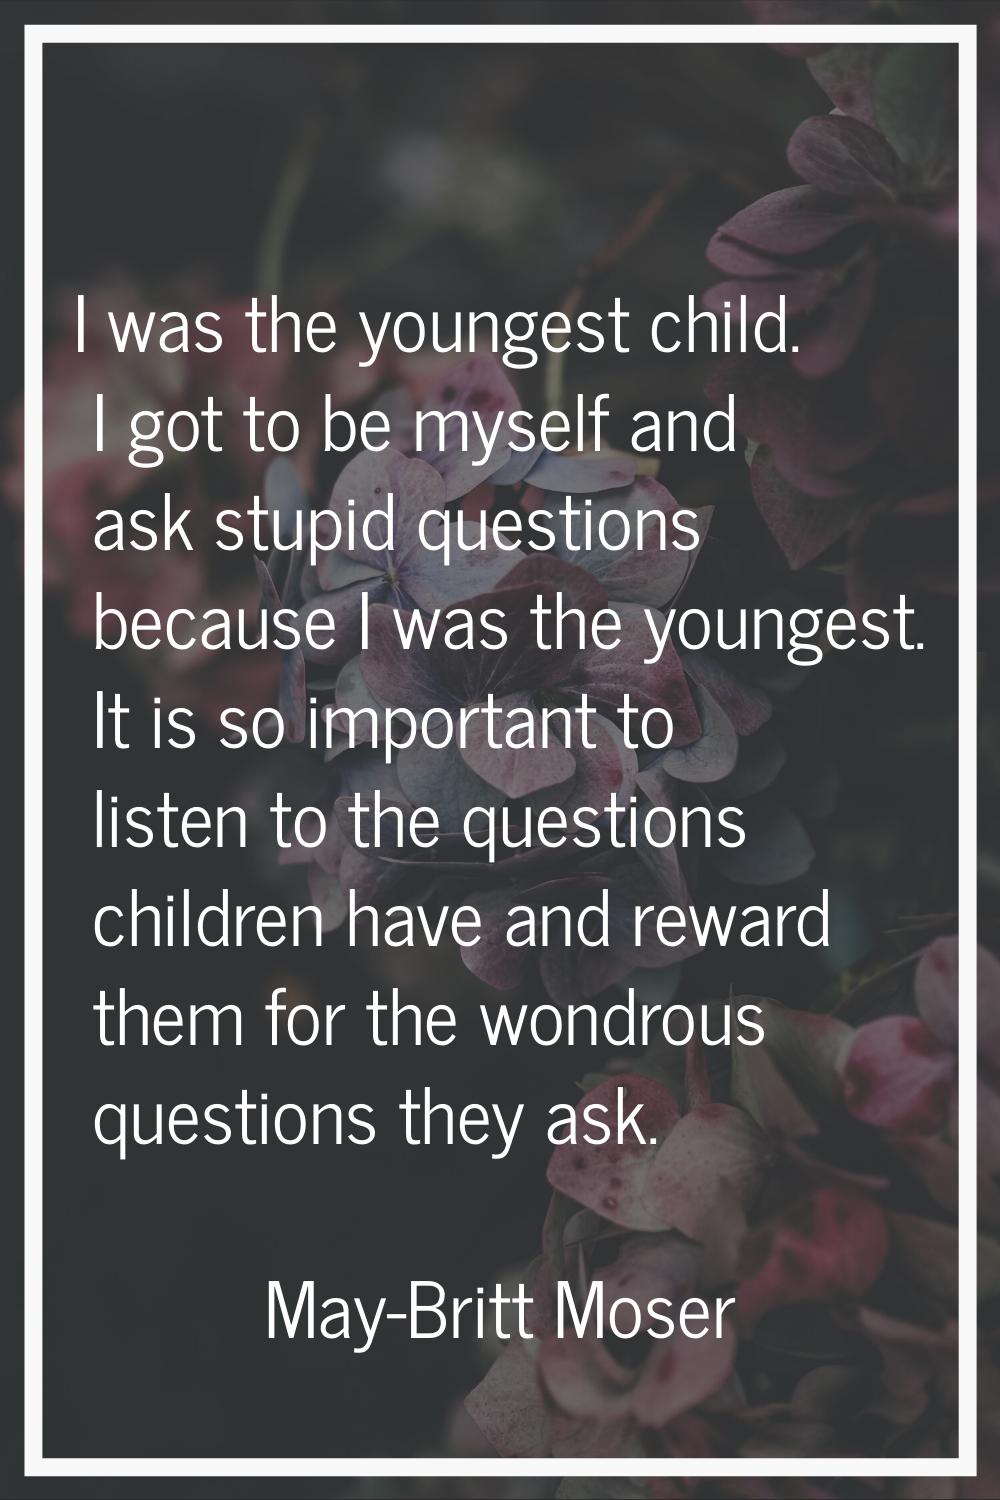 I was the youngest child. I got to be myself and ask stupid questions because I was the youngest. I